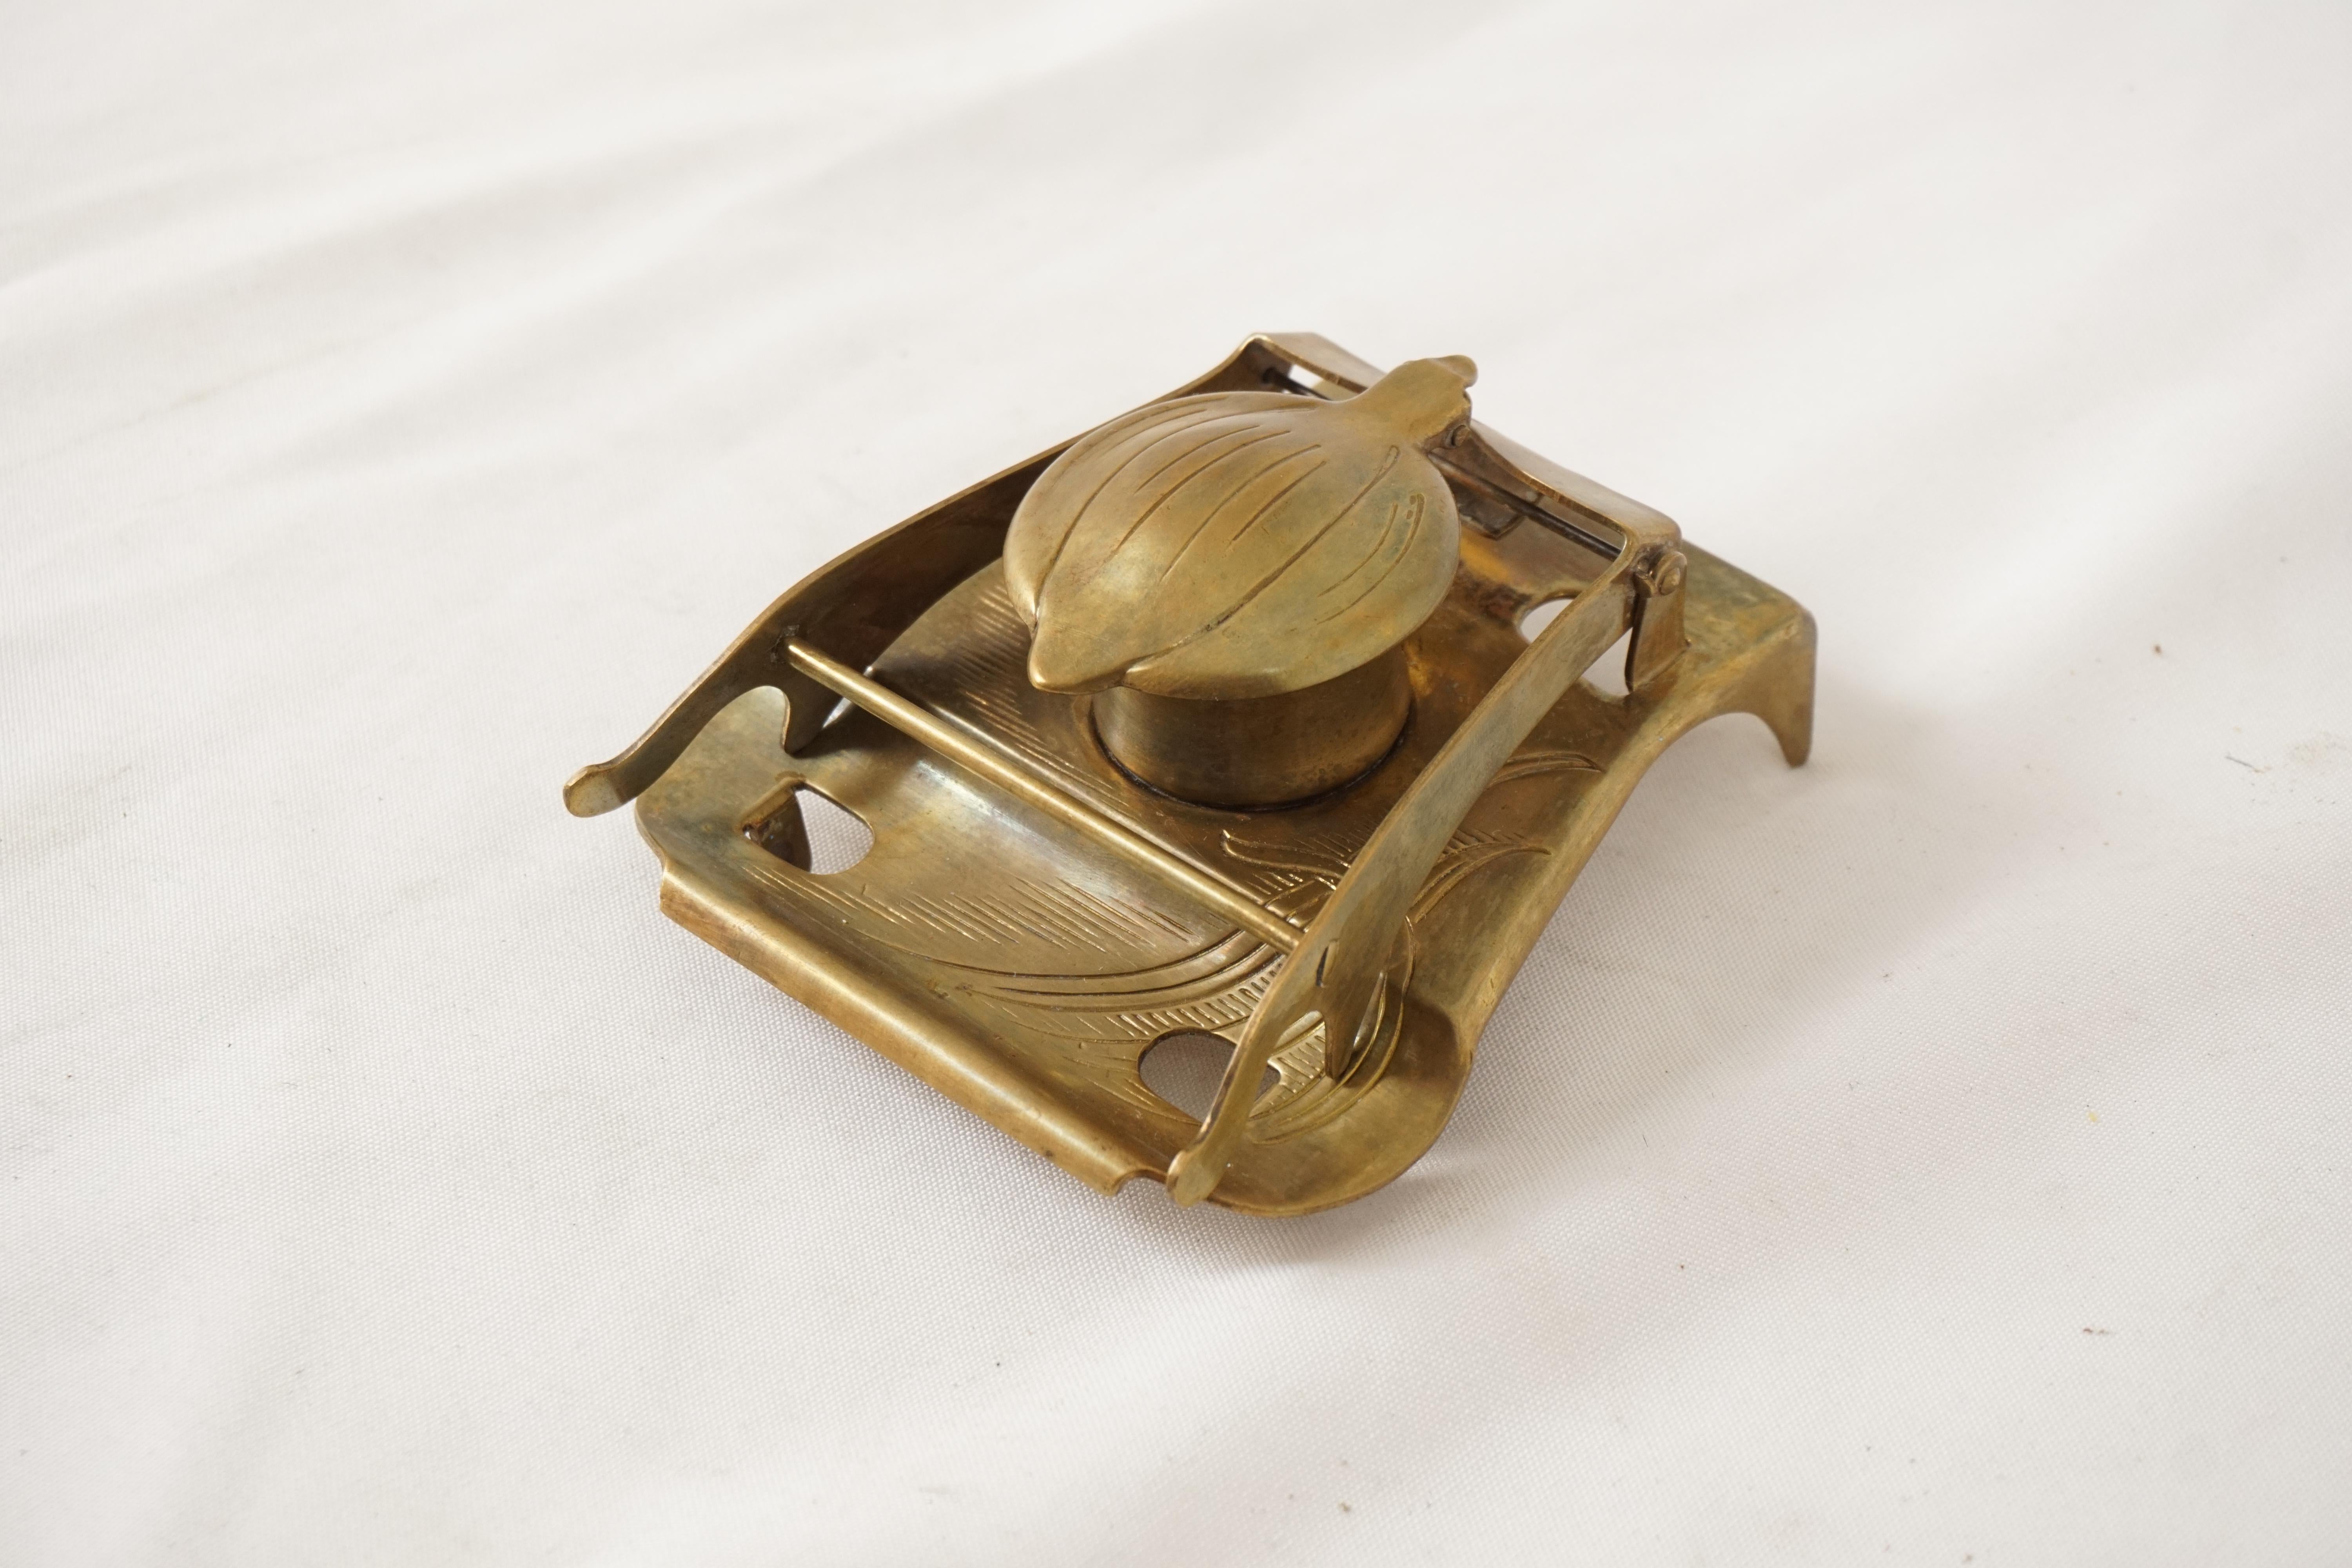 Antique Brass Inkstand, Art Nouveu, Ceramic Insert, Scotland 1910, B2776y

Scotland 1910
Brass
Single inkwell with ceramic insert 
Brass pen holder to the back 
Embossed base 
All in good condition 

B2776Y

Measures: 3.75